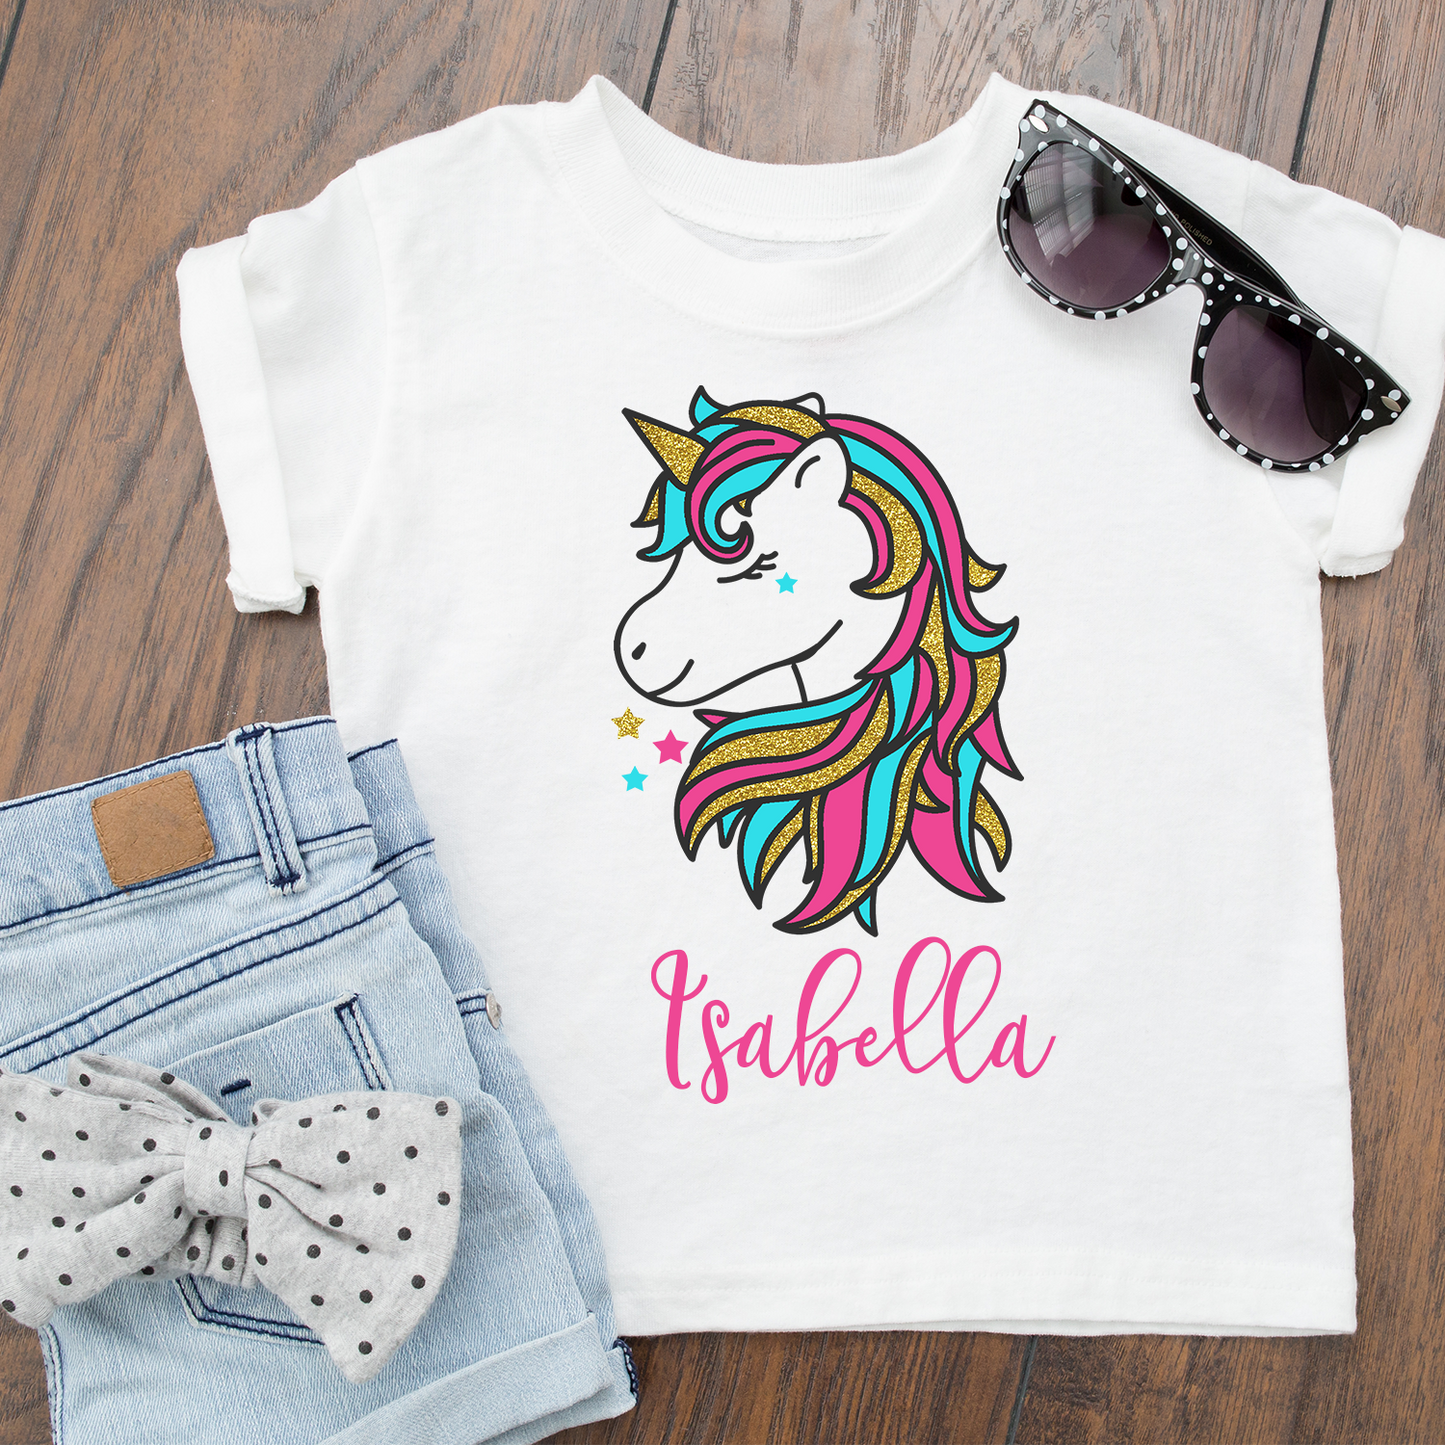 Personalised Girly Glitter Unicorn T-Shirt Top baby, toddler and kids sizes! #summerready